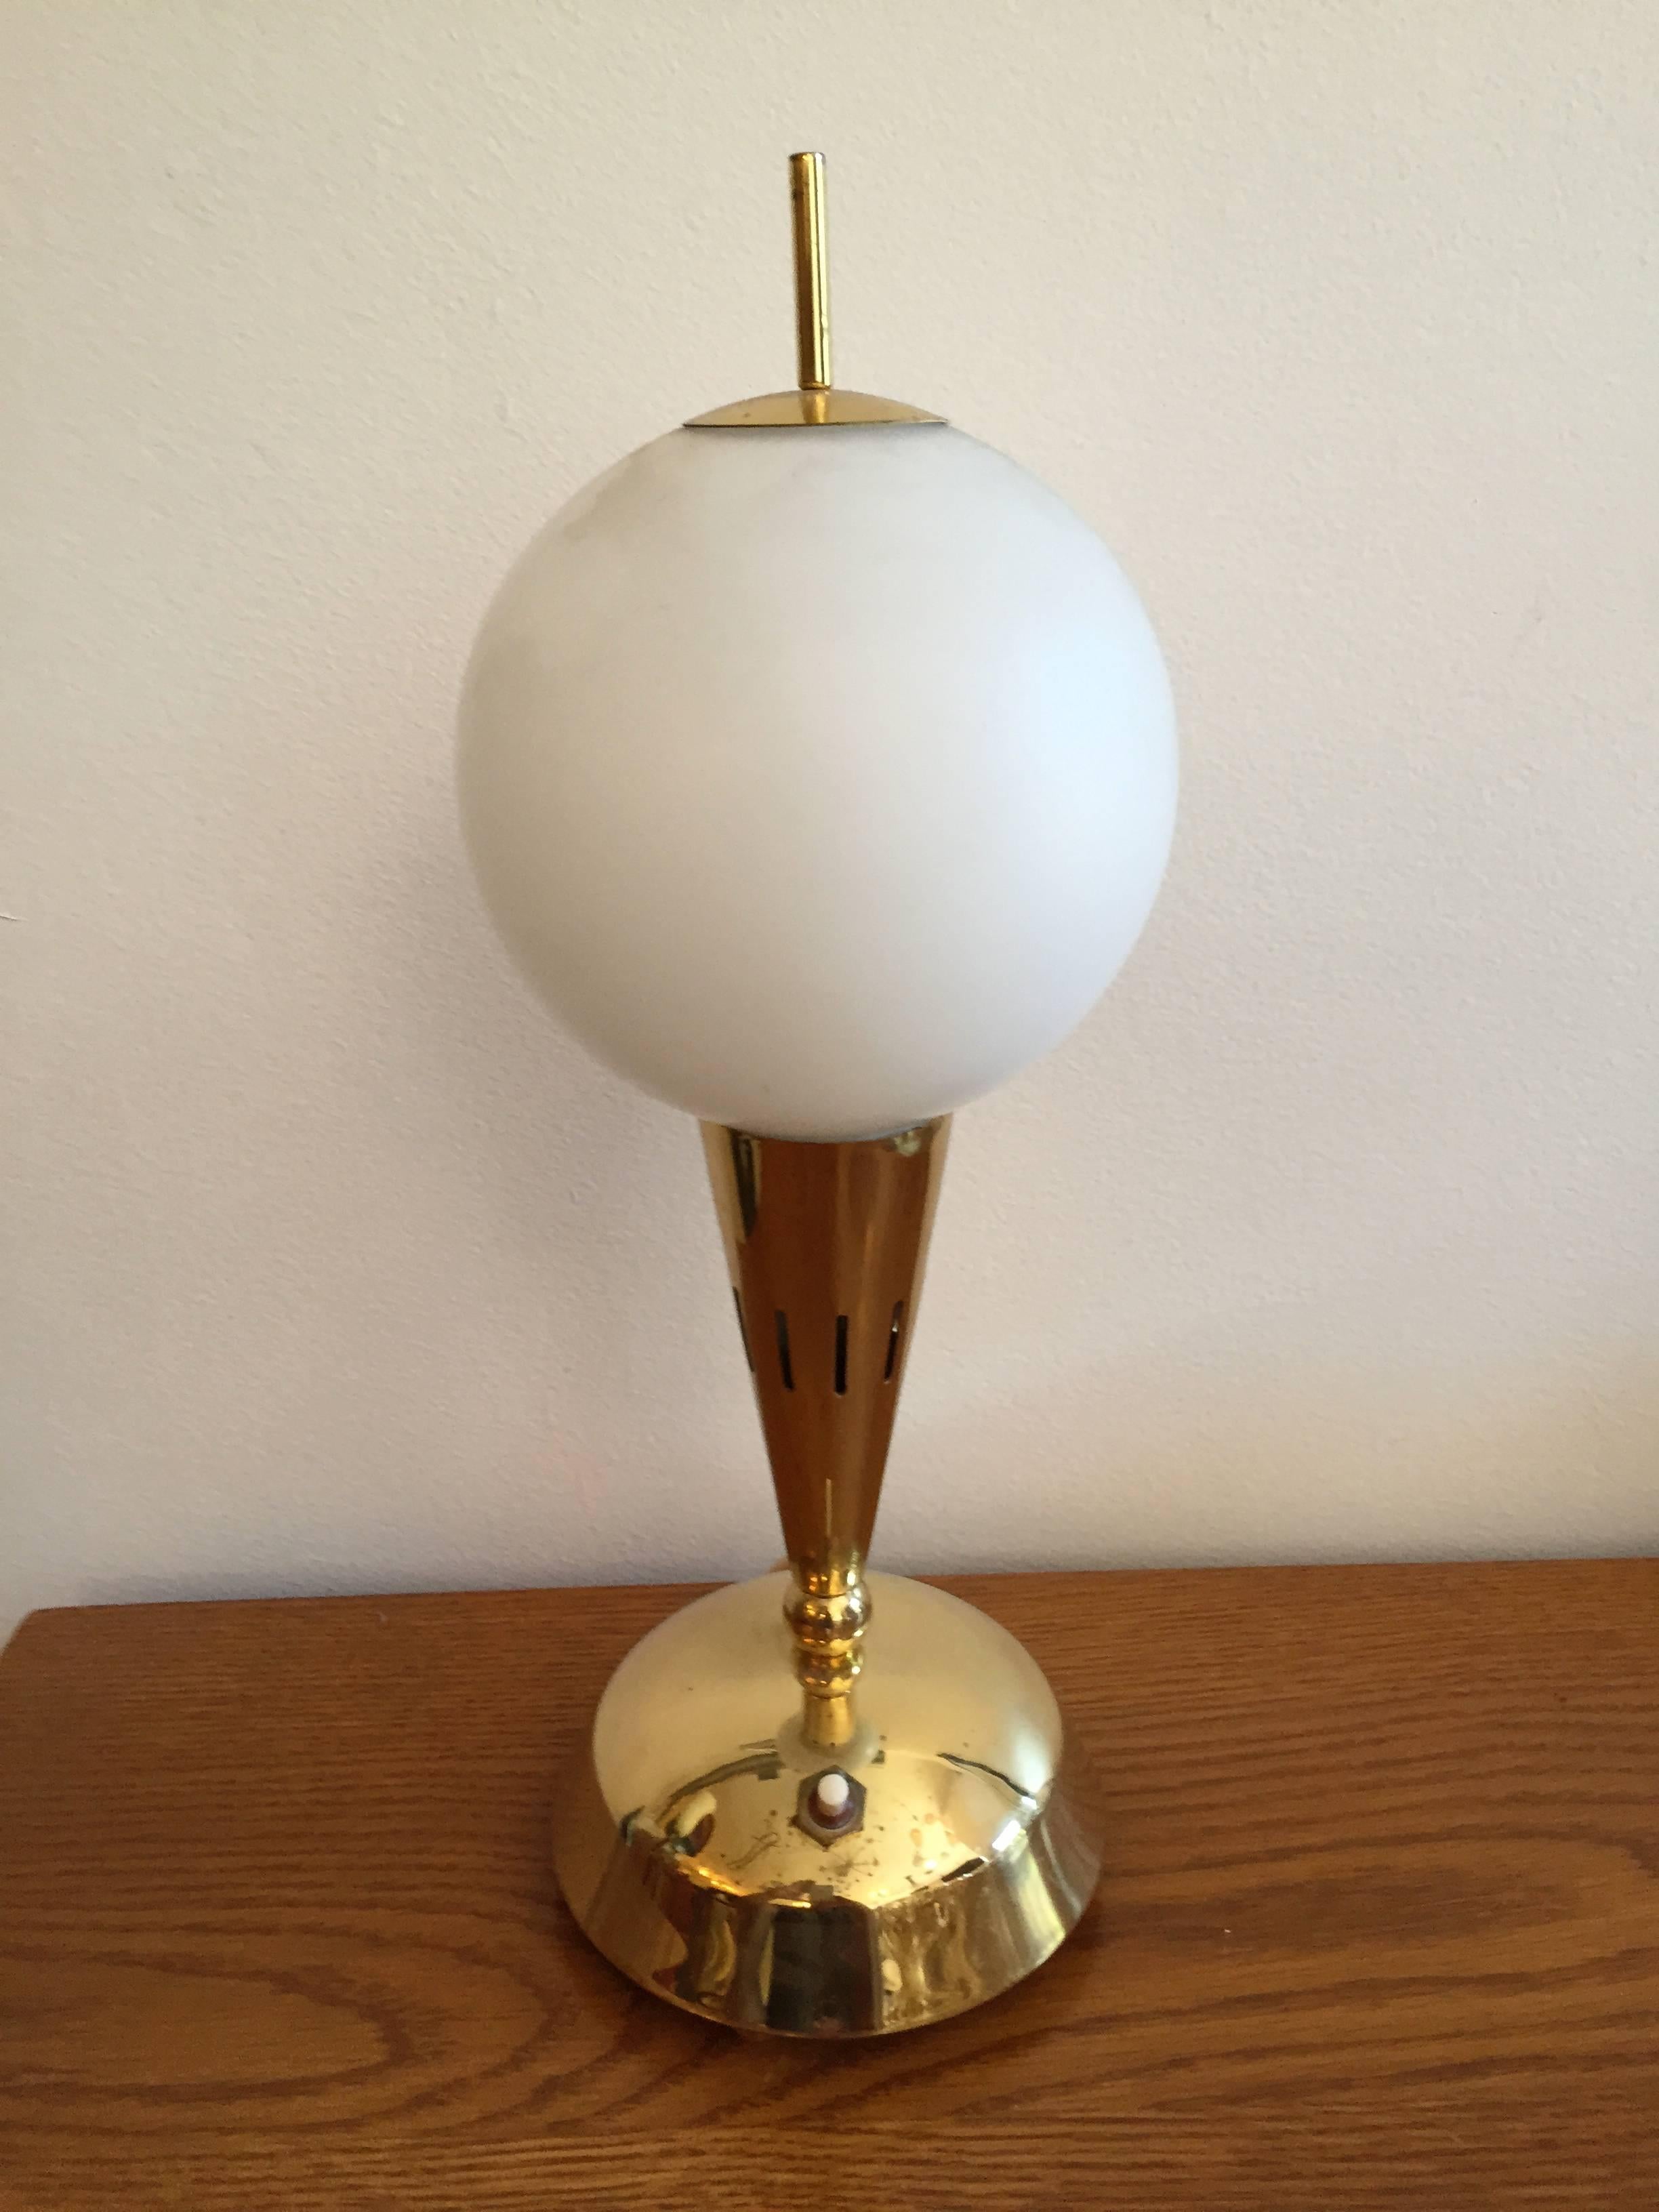 A wonderful pair of 1950s Italian brass table lamps with white glass globe shades. Rewired.